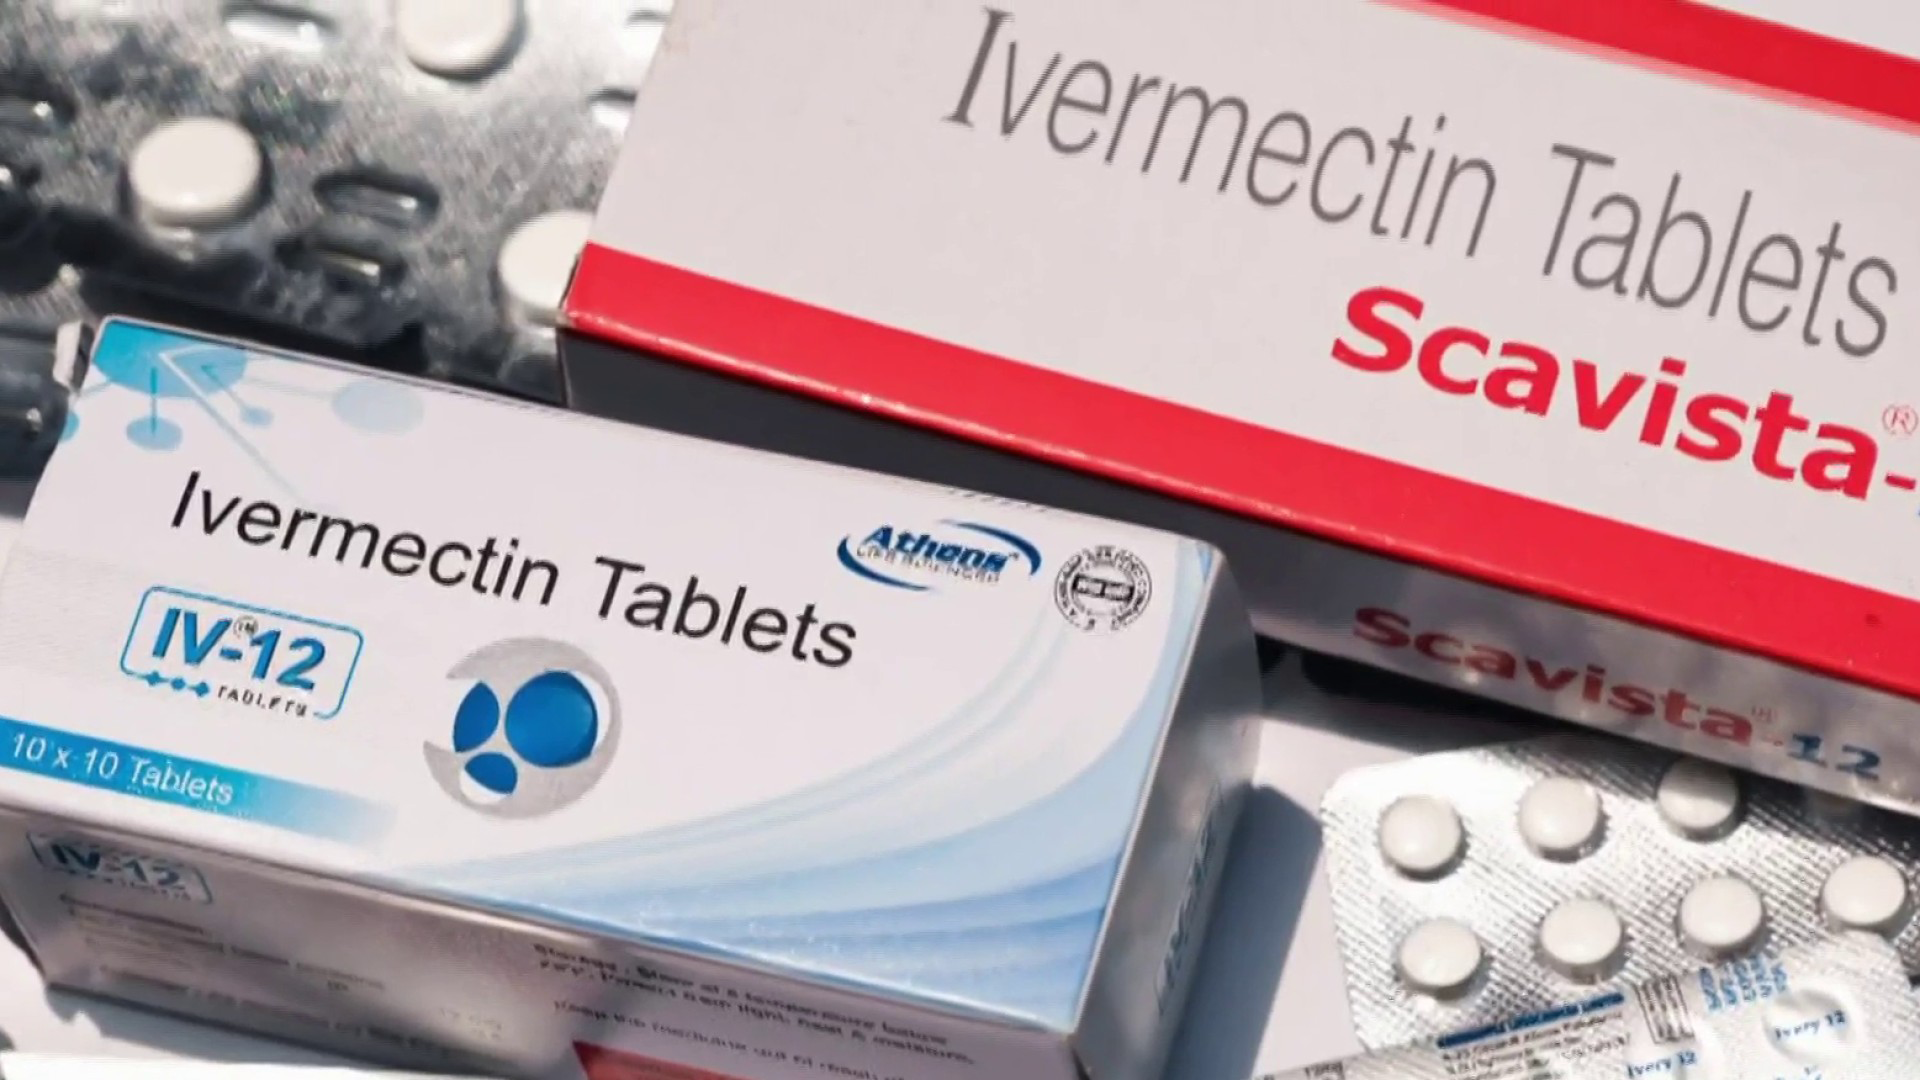 TWC Chief Medical Board Endorses Ivermectin and Hydroxychloroquine for COVID-19